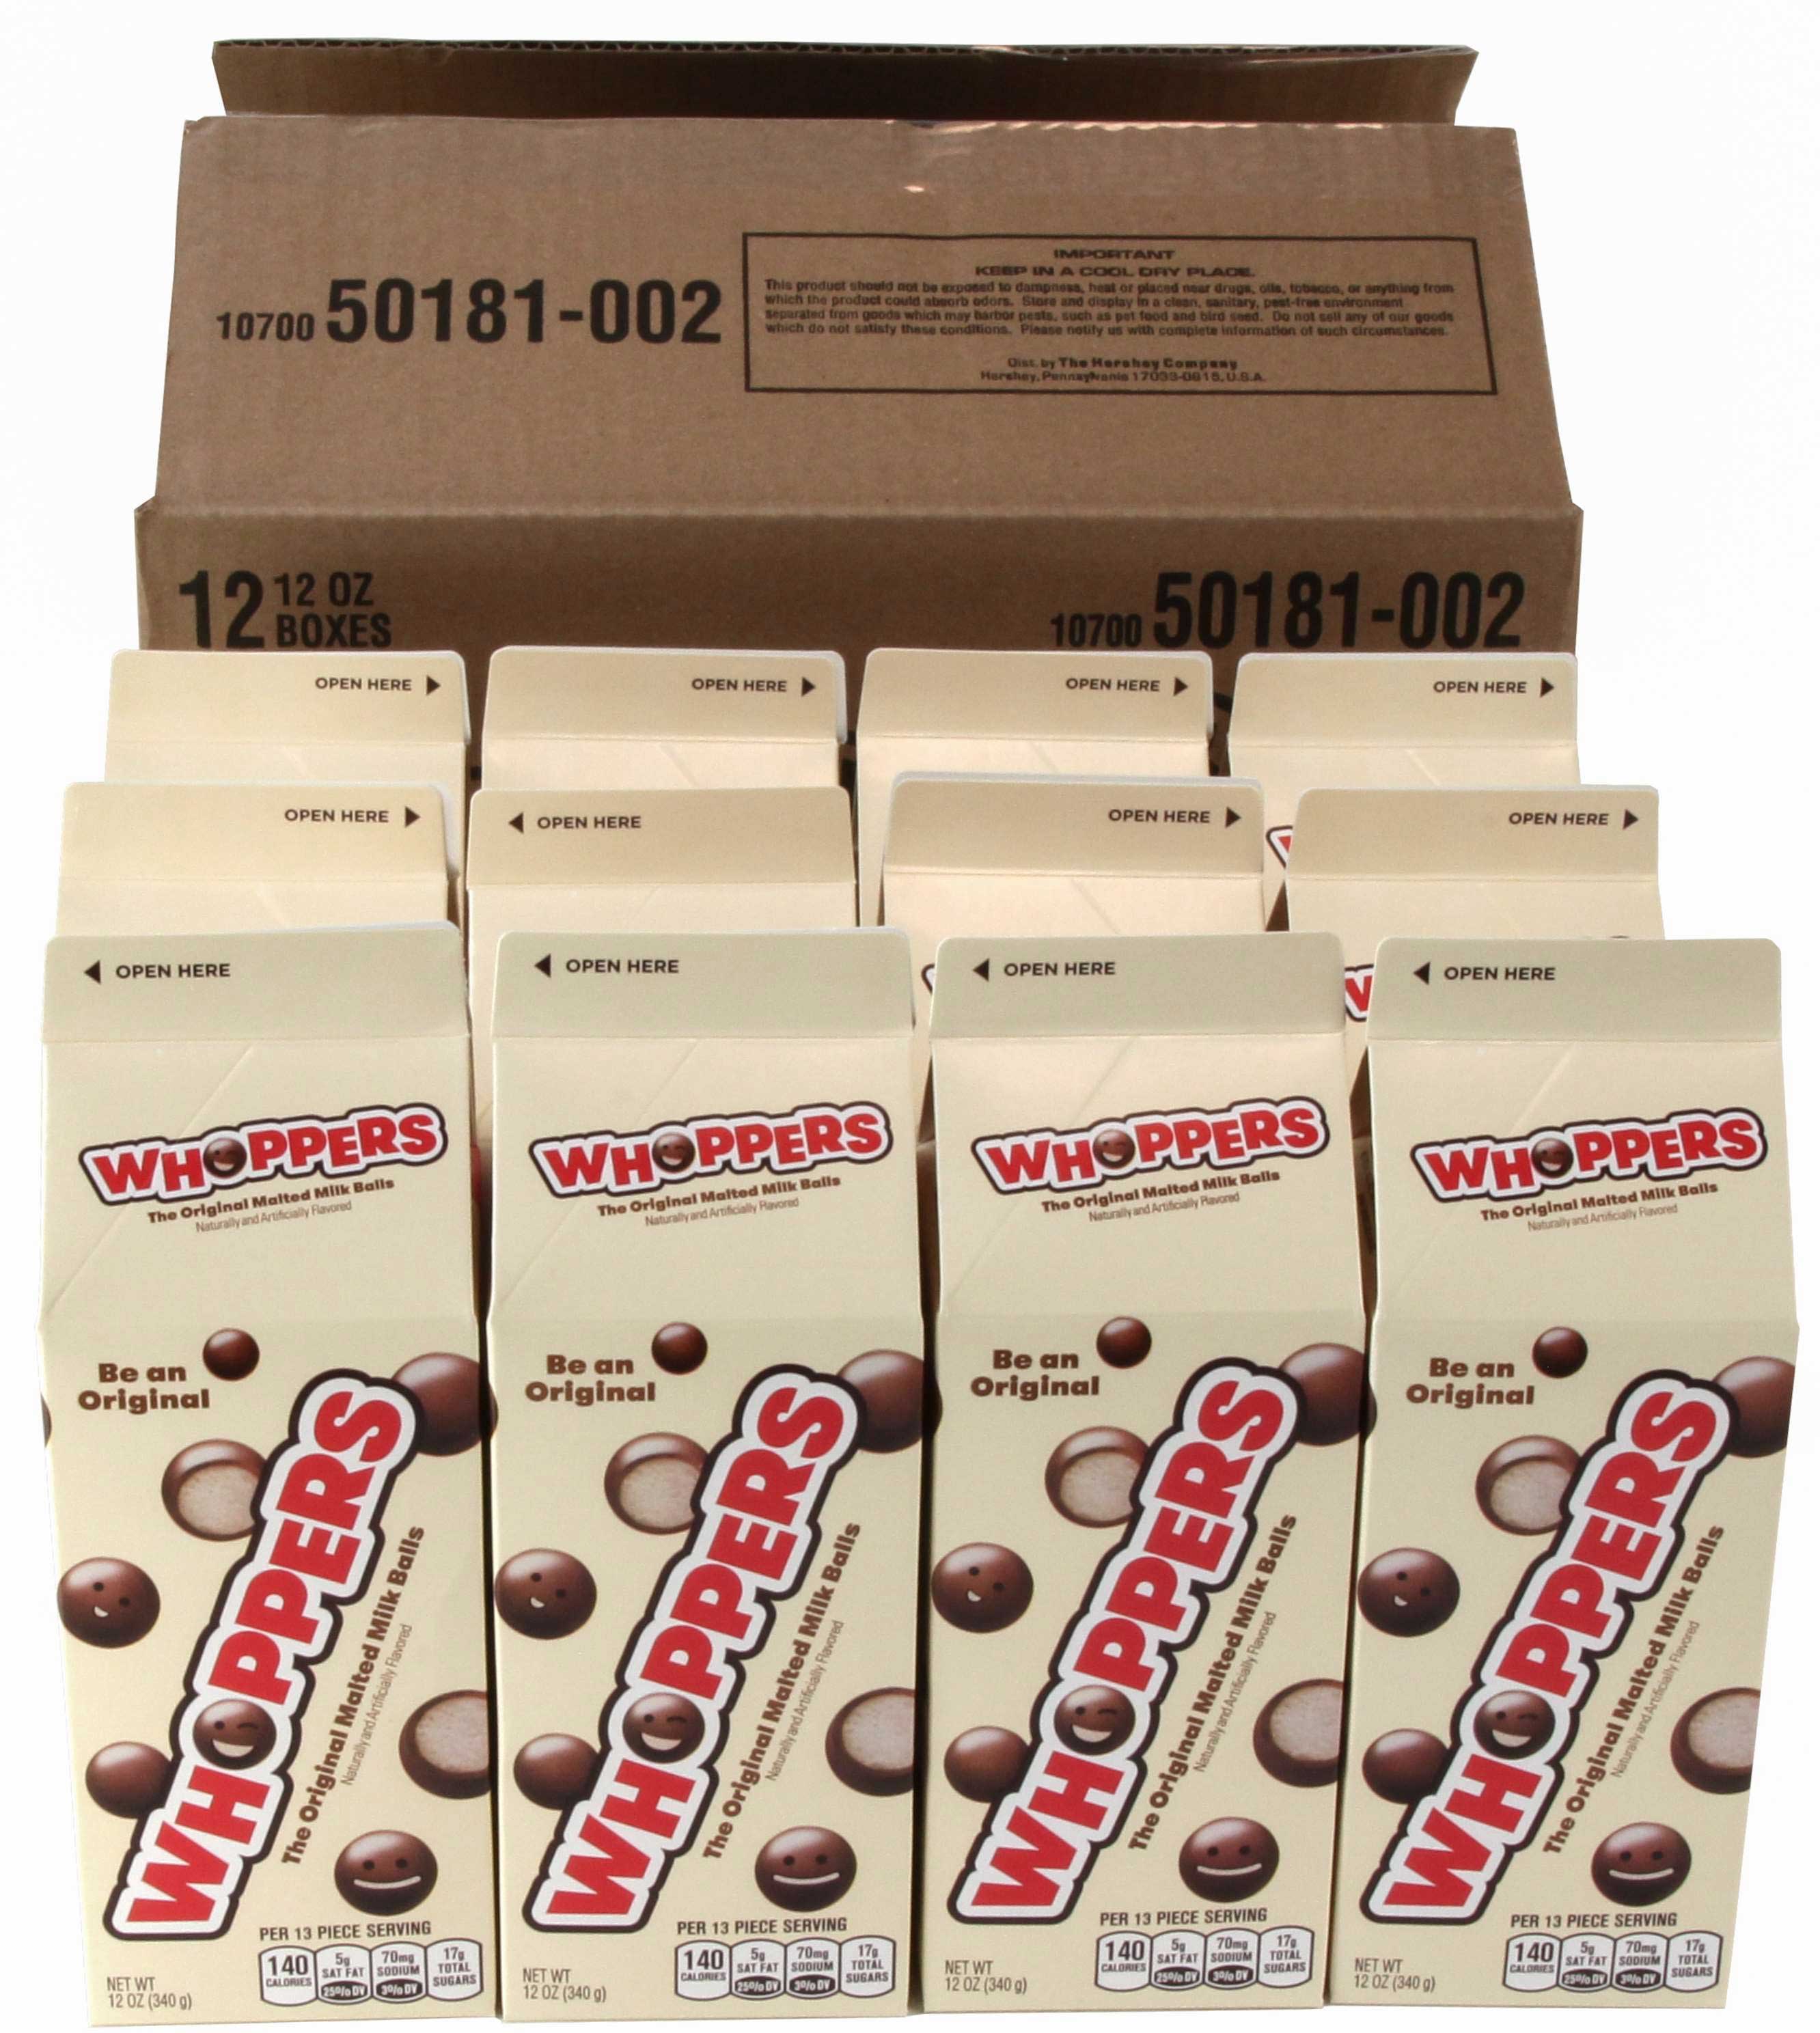 TR Toppers Whole Whoppers, 12 Ounce Box -- 12 per case